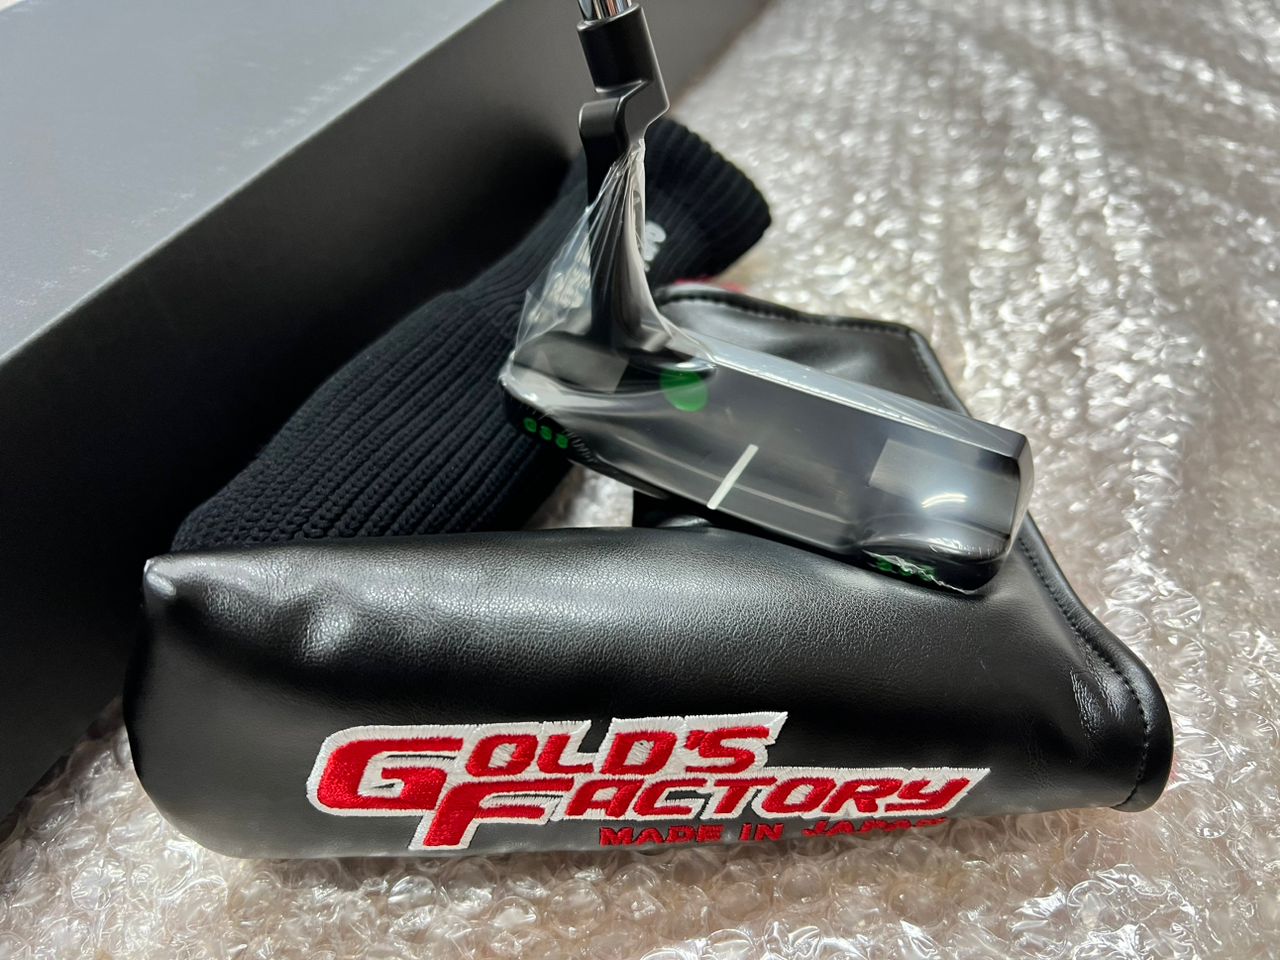 GOLD'S FACTORY 4039 - NEWPORT 1 GSS 350 STYLE PUTTER